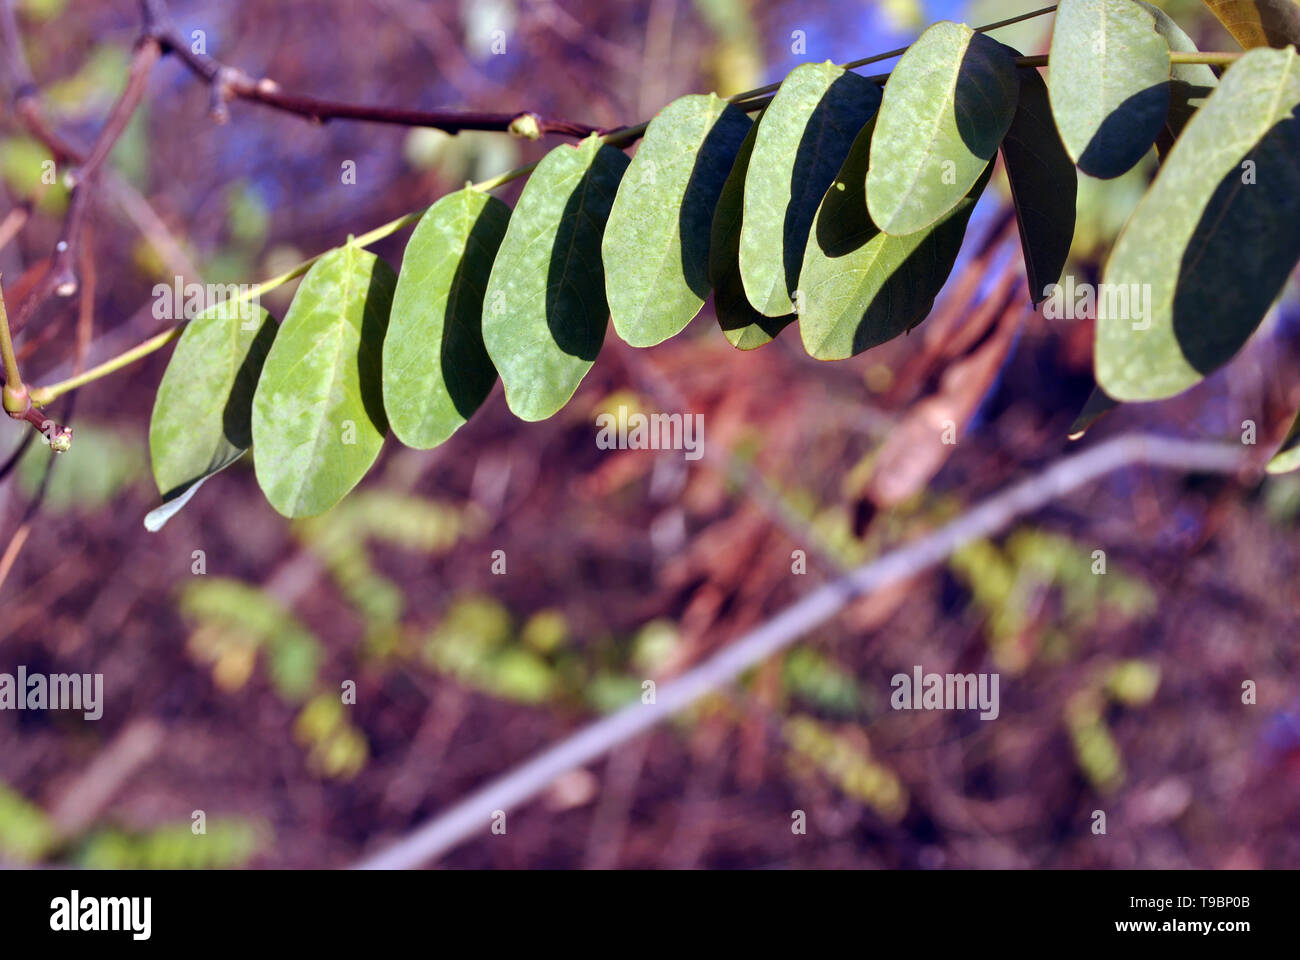 Green acacia leaf on branch, blurry forest background, close up detail Stock Photo